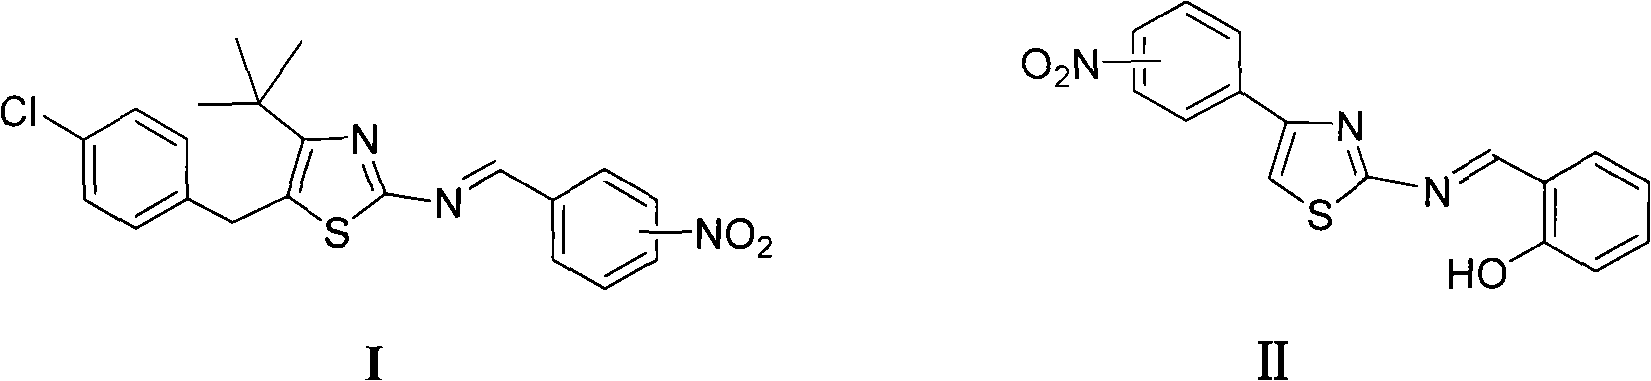 Thiazole schiff base containing nitryl, preparation and uses thereof